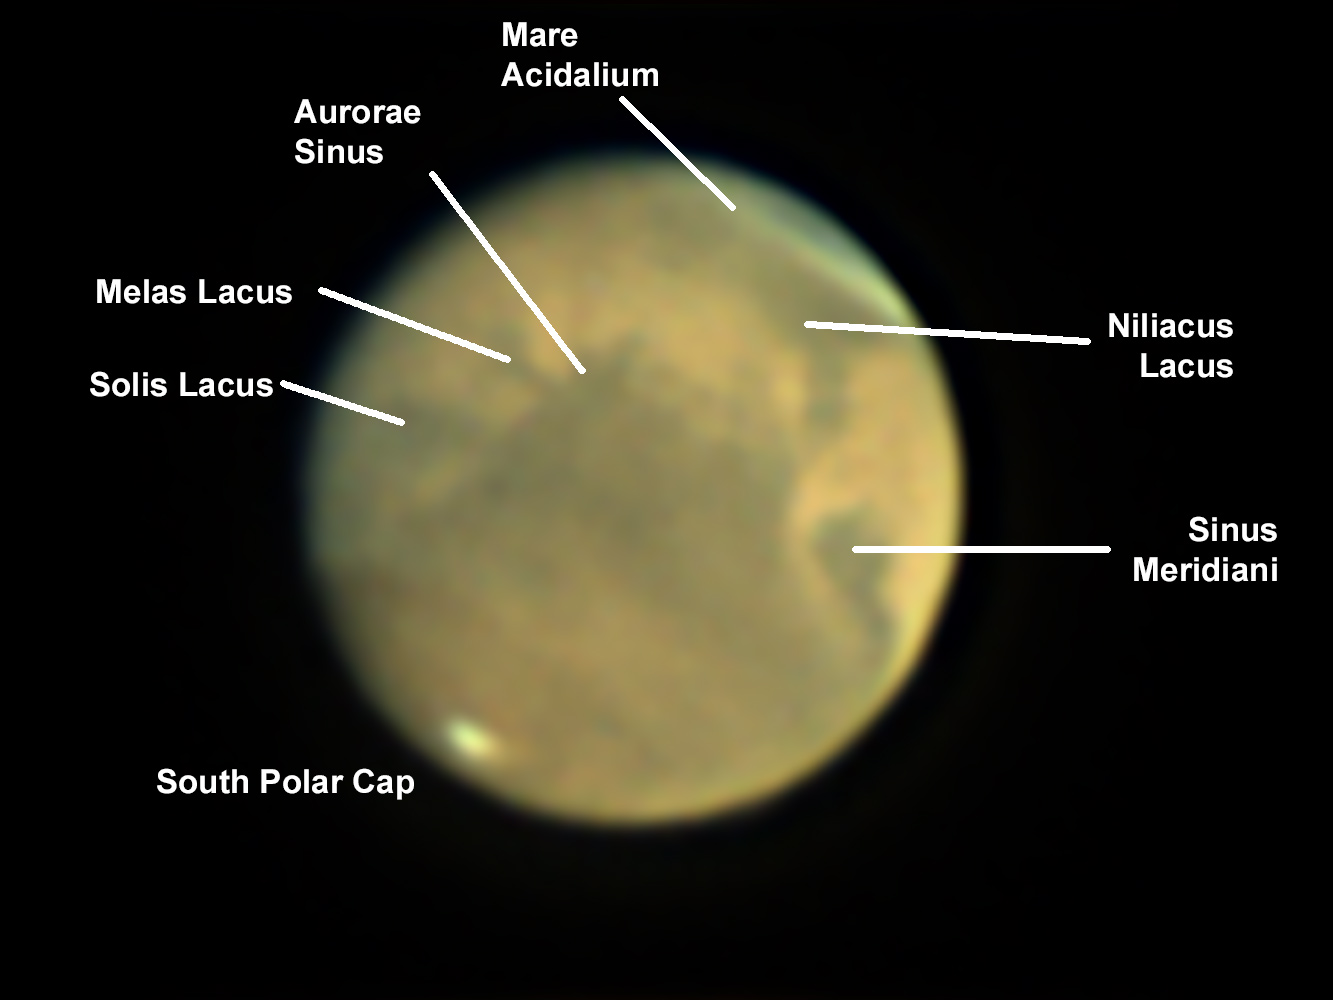 Mars on Nov 6, 2020 at 5:07 UT with some labeled features